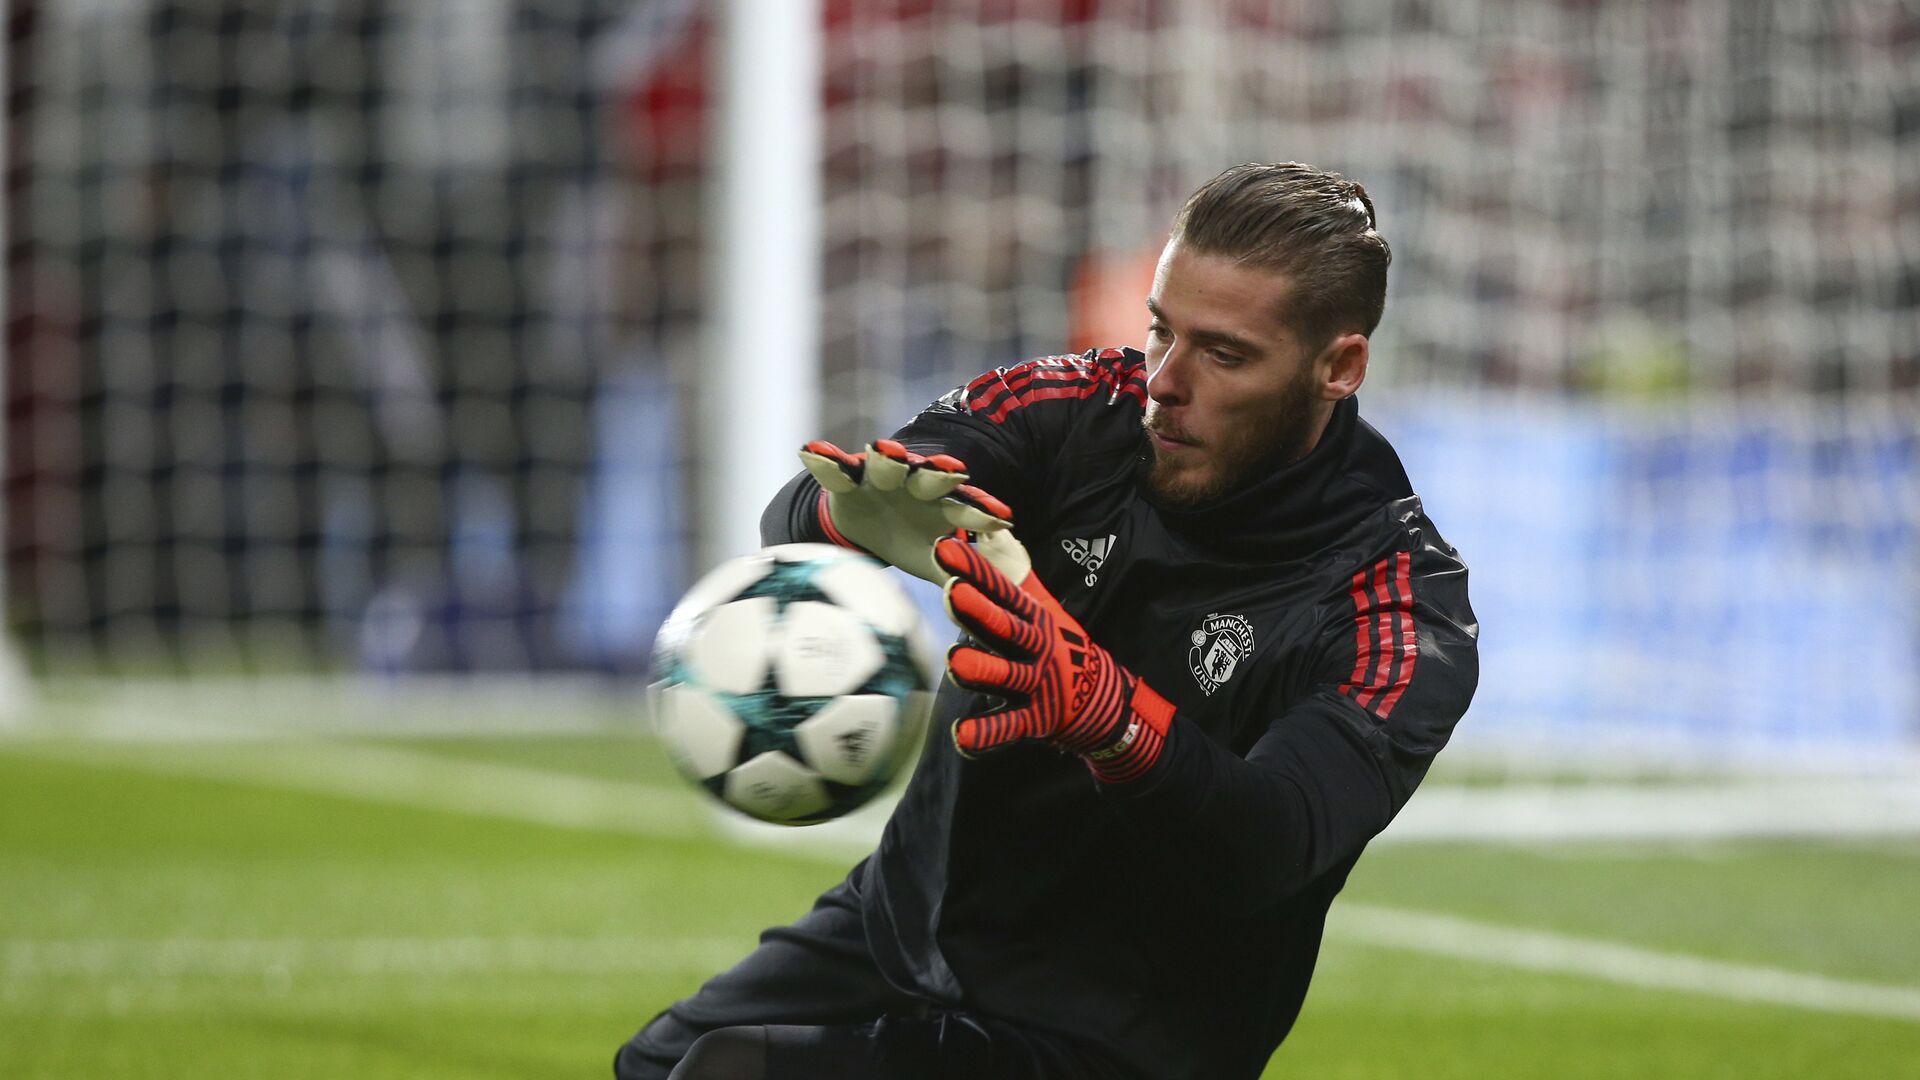 Manchester United goalkeeper David de Gea warms up before the Champions League group A soccer match between Manchester United and Benfica, at Old Trafford, in Manchester, England, Tuesday, Oct. 31, 2017 - اسپوتنیک افغانستان  , 1920, 24.02.2022